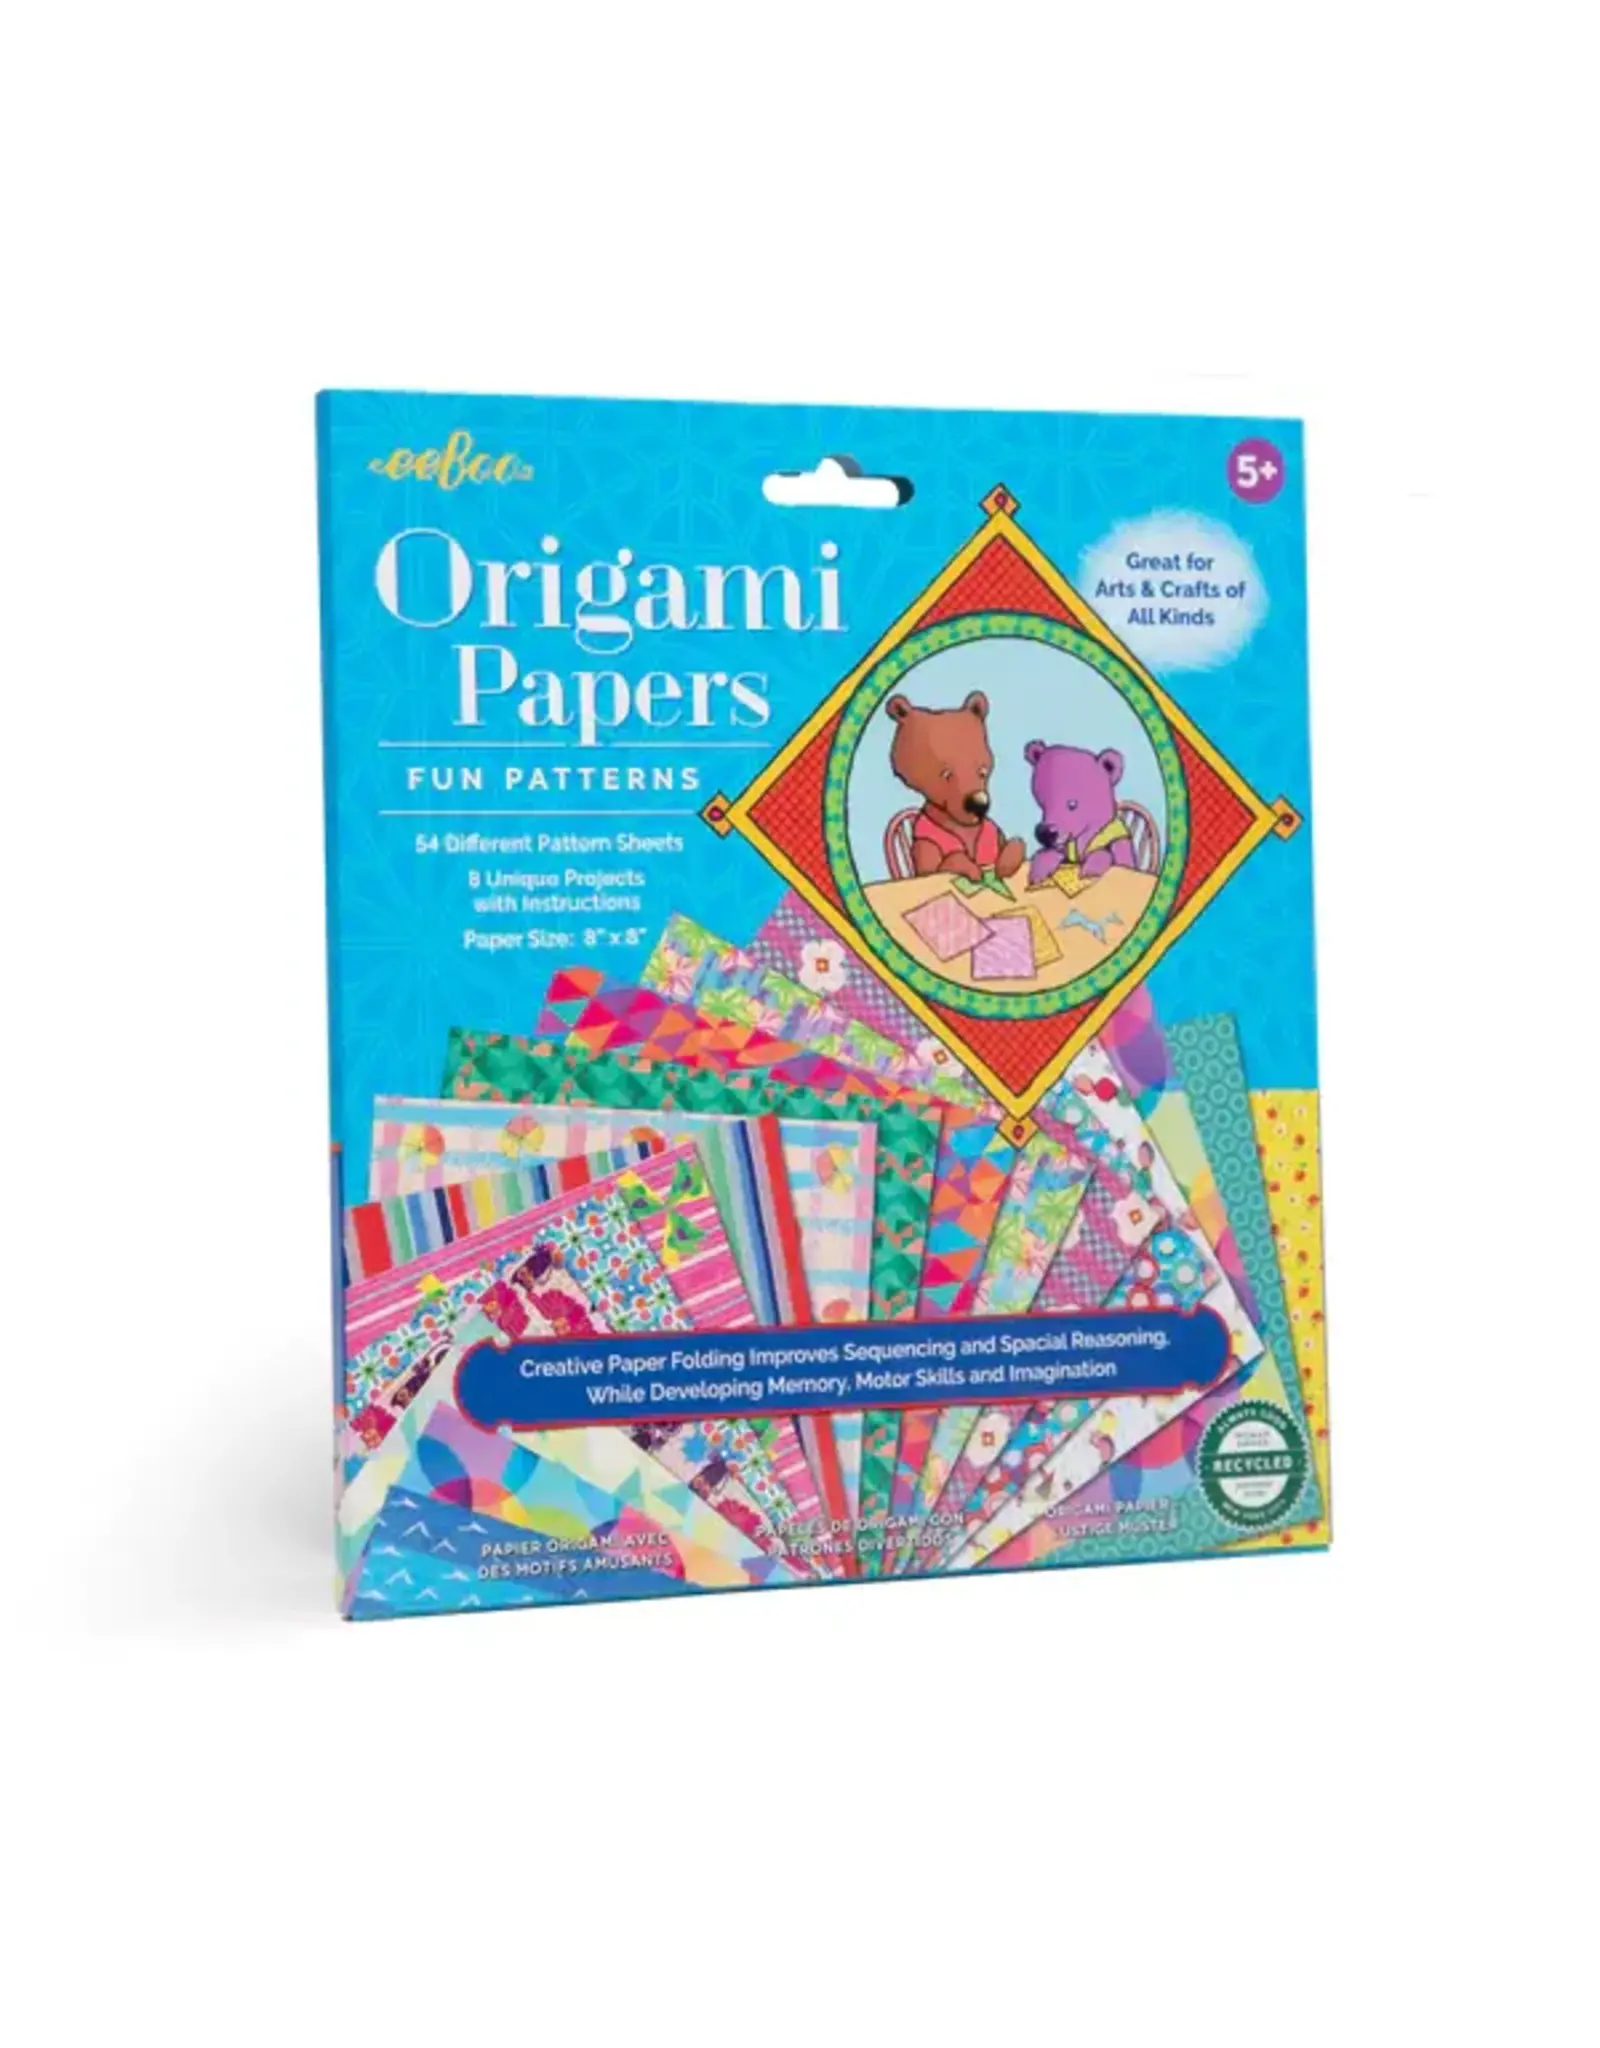 Origami Papers Fun Patterns